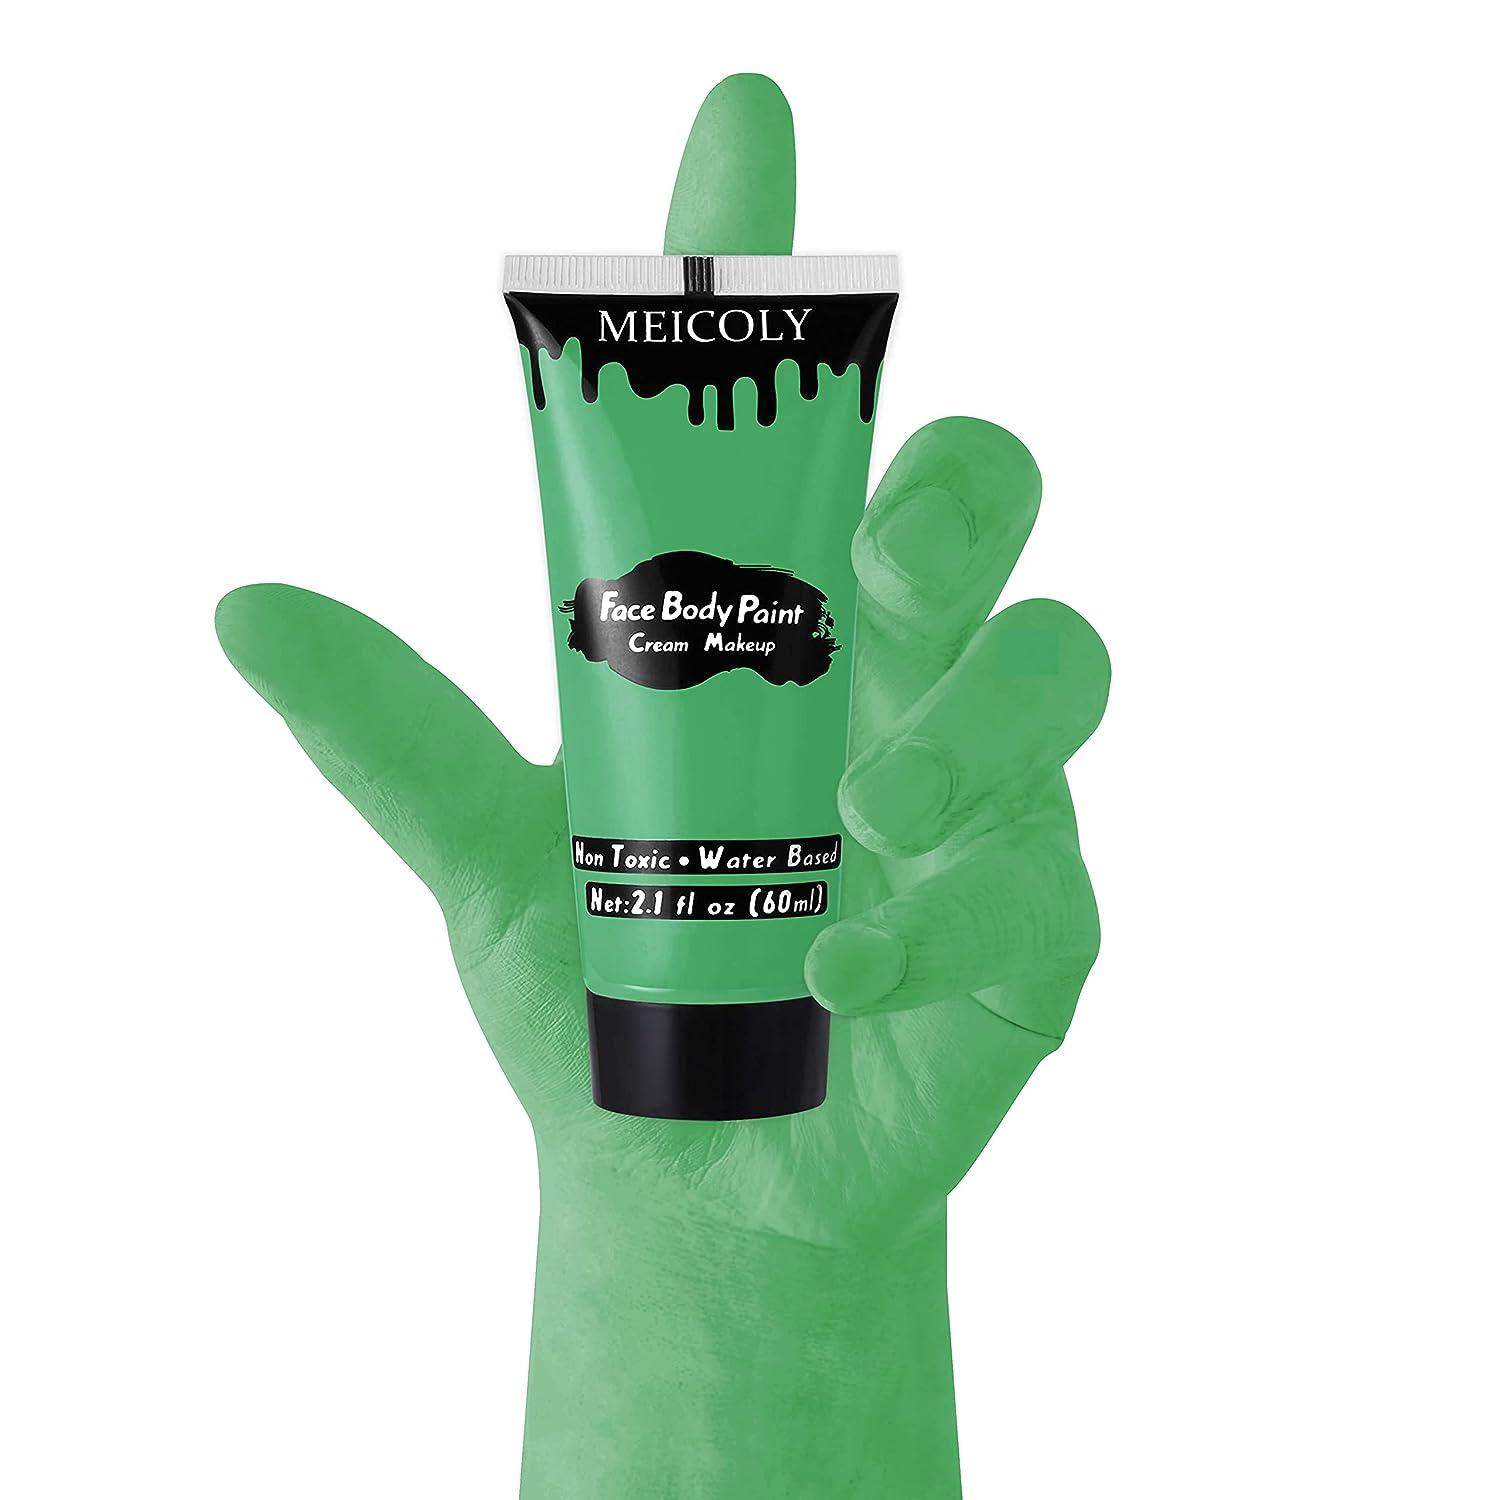 MEICOLY Green Cream Face Body Paint, Christmas Grinch Face Paint, Body  Paint for Adults and Children,Camouflage Hunting Hulk Face Paint,Halloween  SFX Gamora Witch Makeup,Green